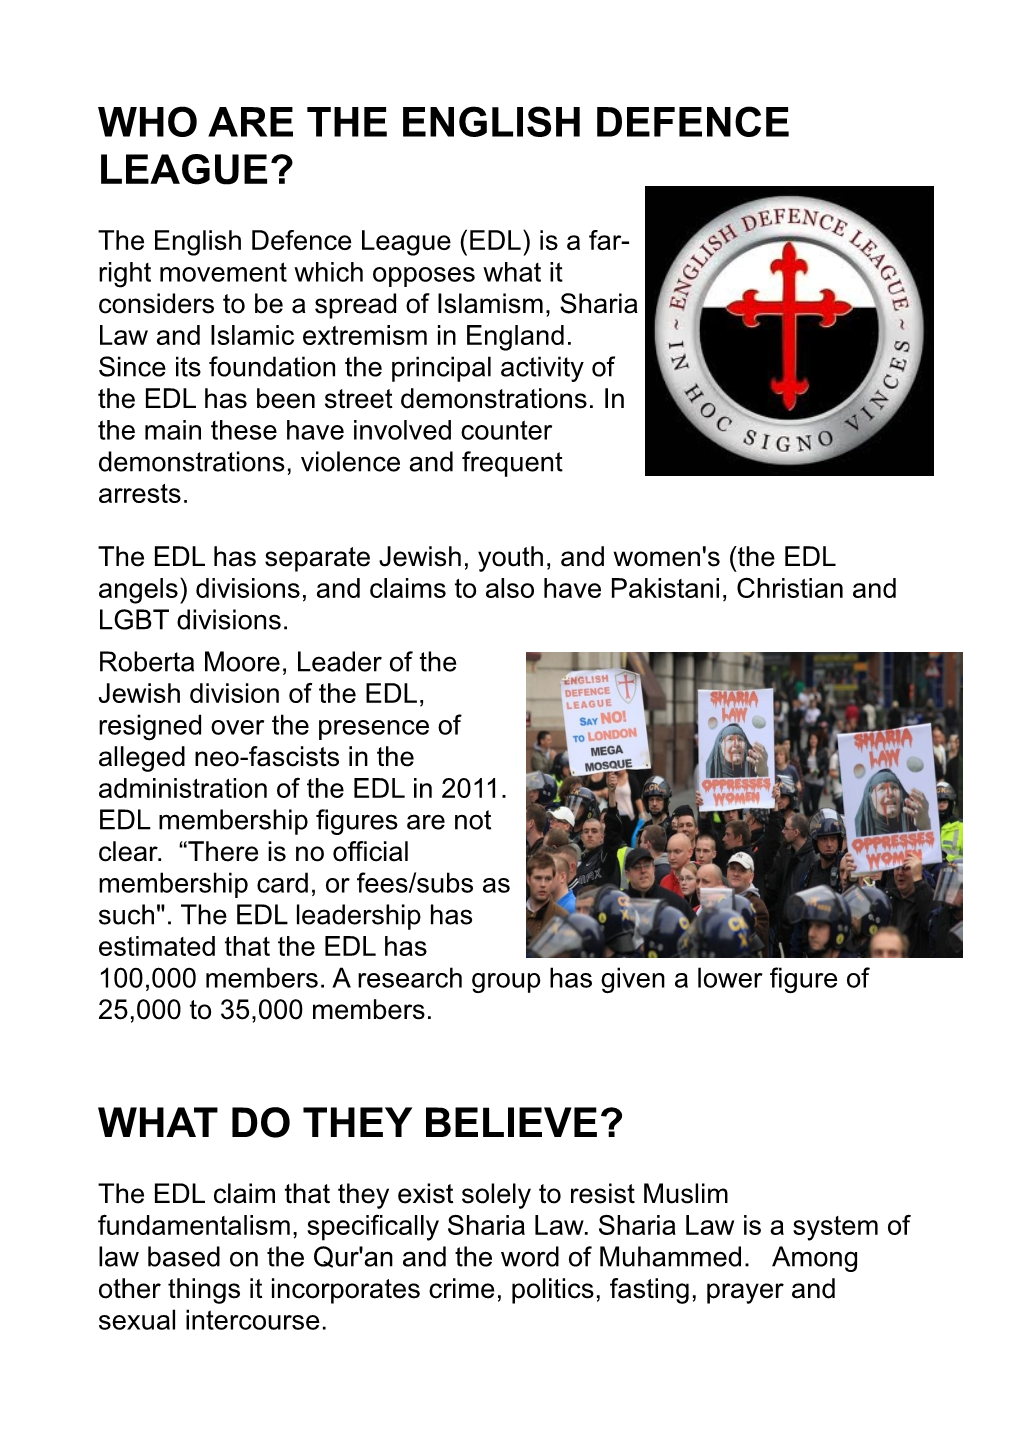 Who Are the English Defence League? What Do They Believe?